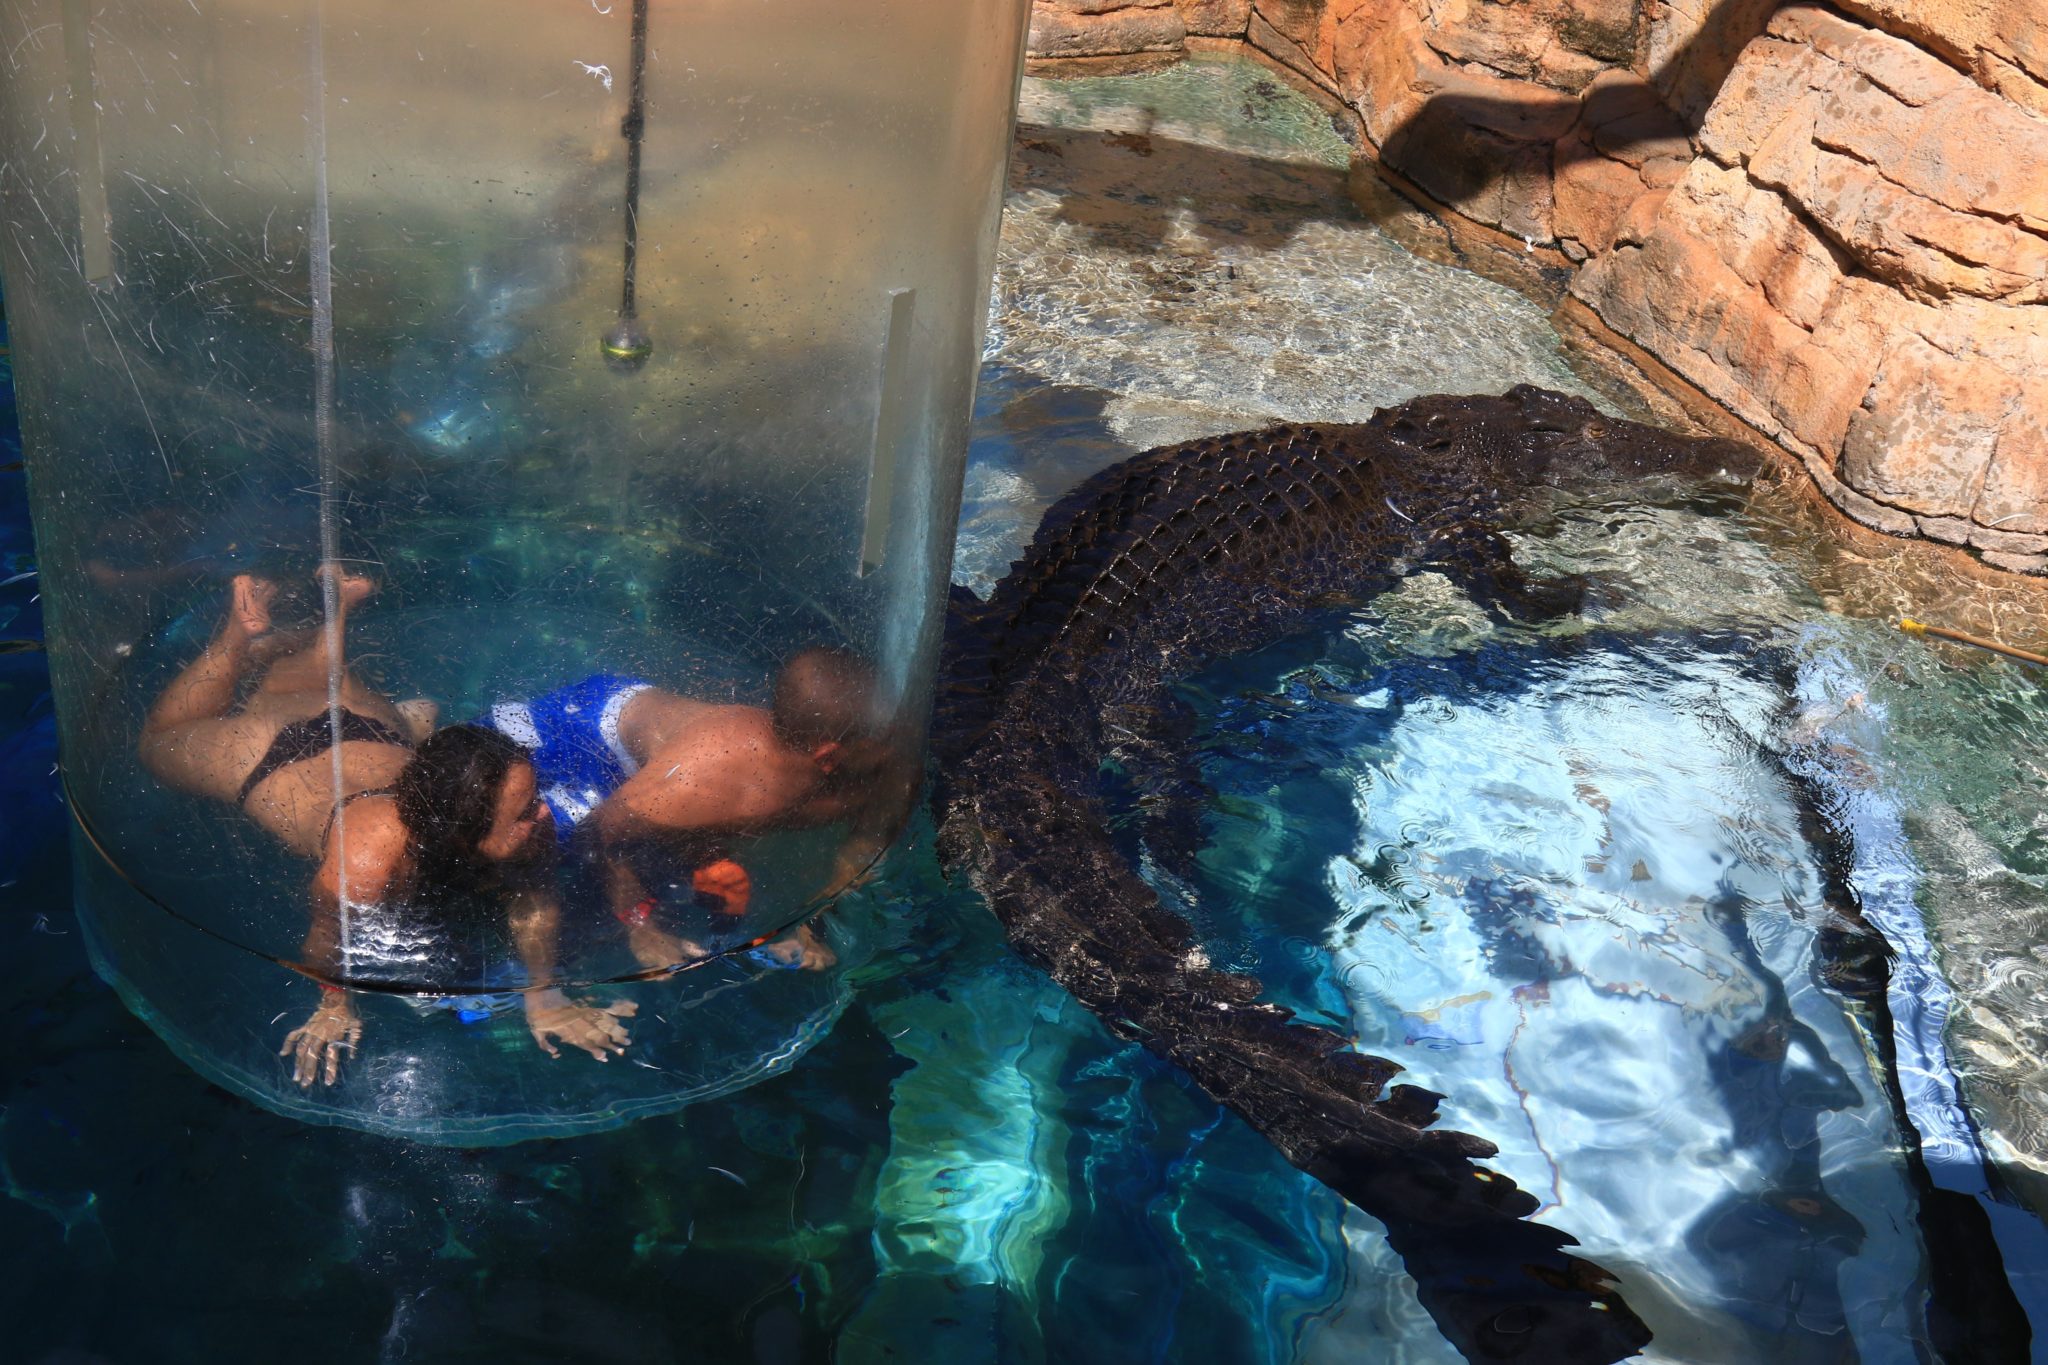 a man and woman in a glass tube with a large alligator in the water